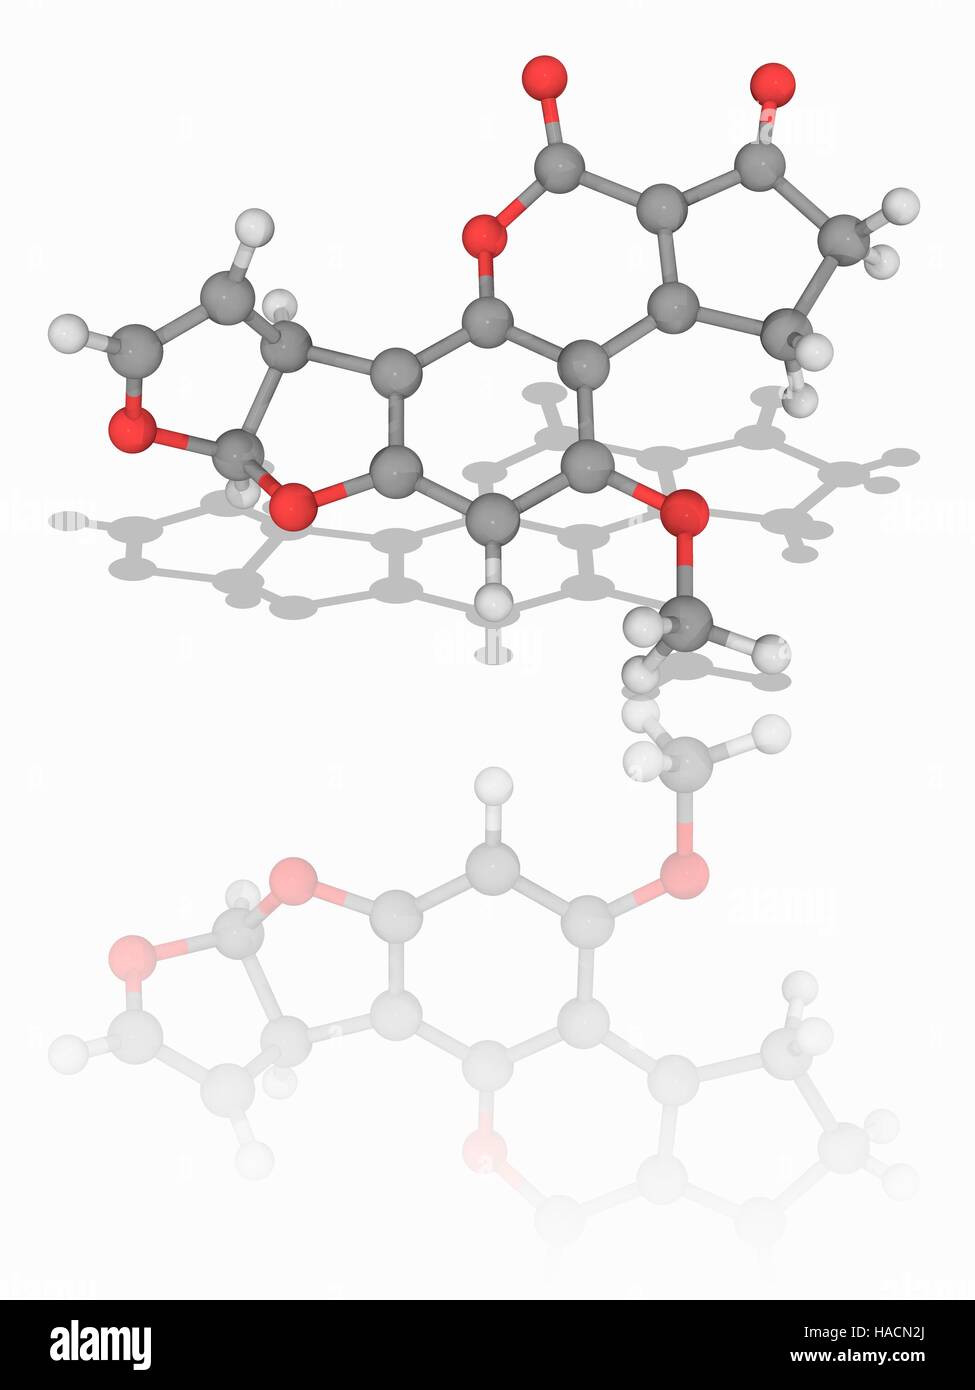 Aflatoxin B1. Molecular model of the mycotoxin aflatoxin B1 (C17.H12.O6), produced by the fungus Aspergillus flavus. This chemical is extremely carcinogenic (cancer-causing). Atoms are represented as spheres and are colour-coded: carbon (grey), hydrogen (white) and oxygen (red). Illustration. Stock Photo